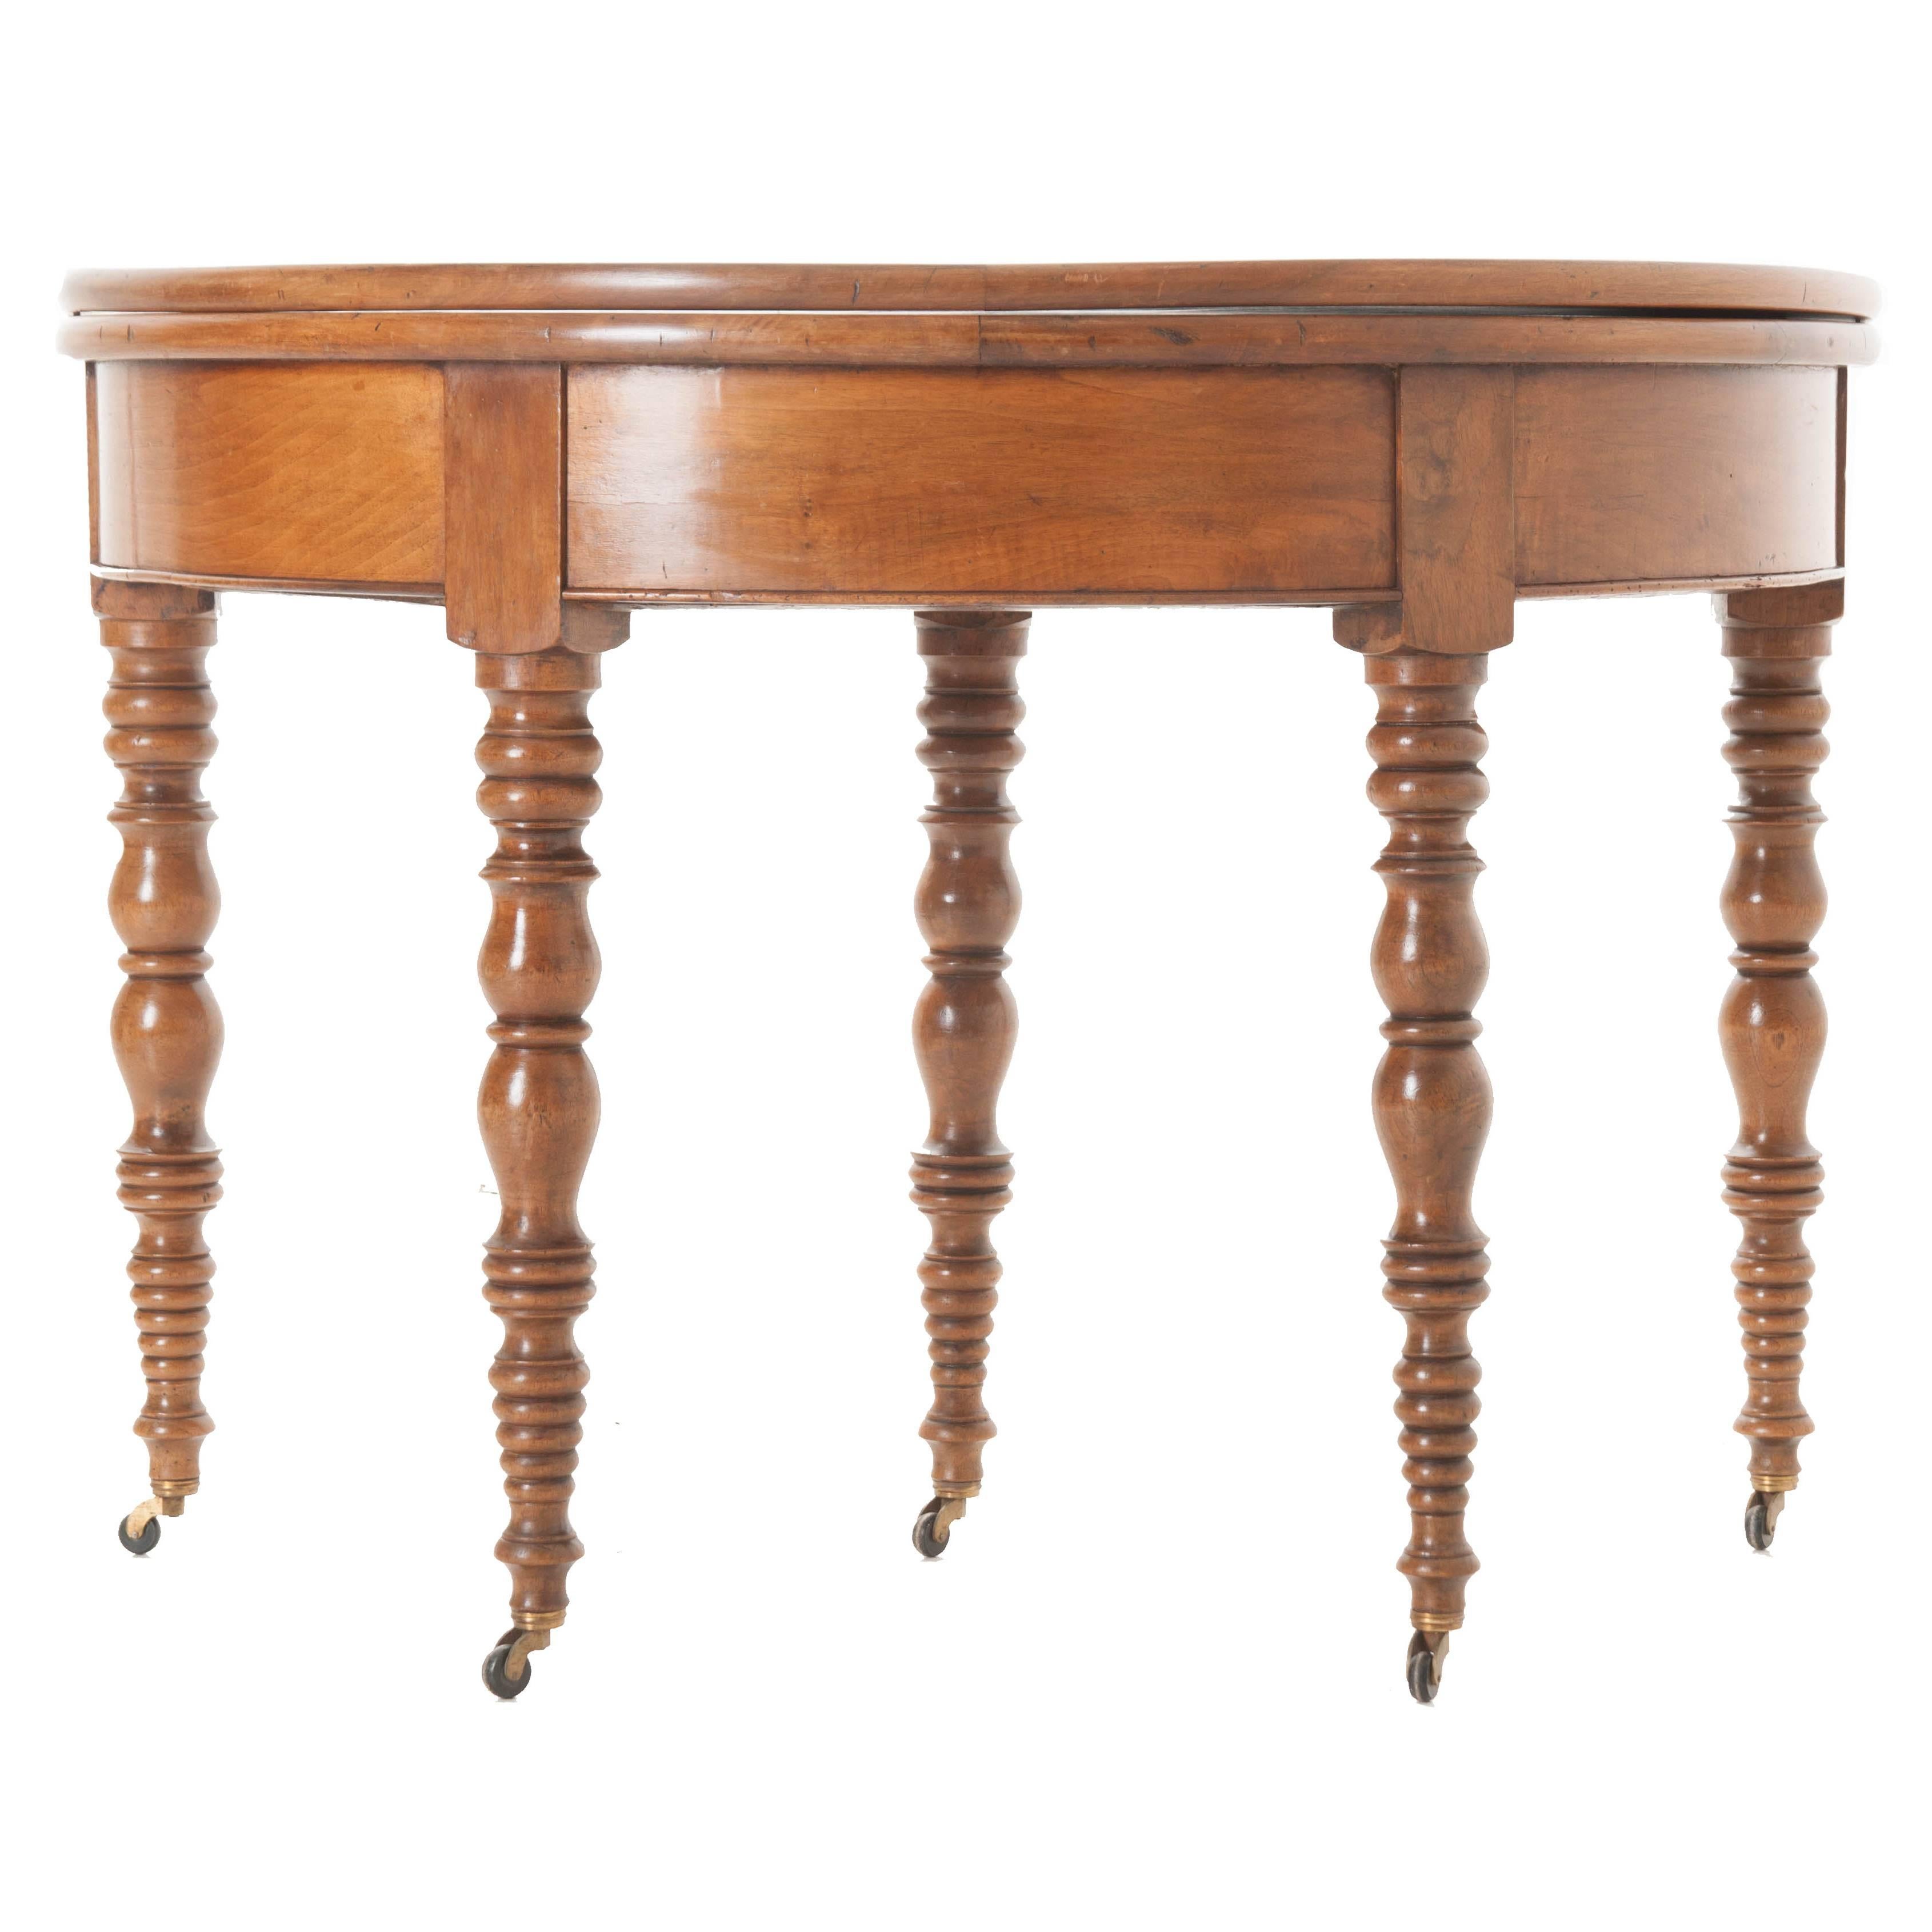 French 19th Century Folding Demilune Table with Drawer